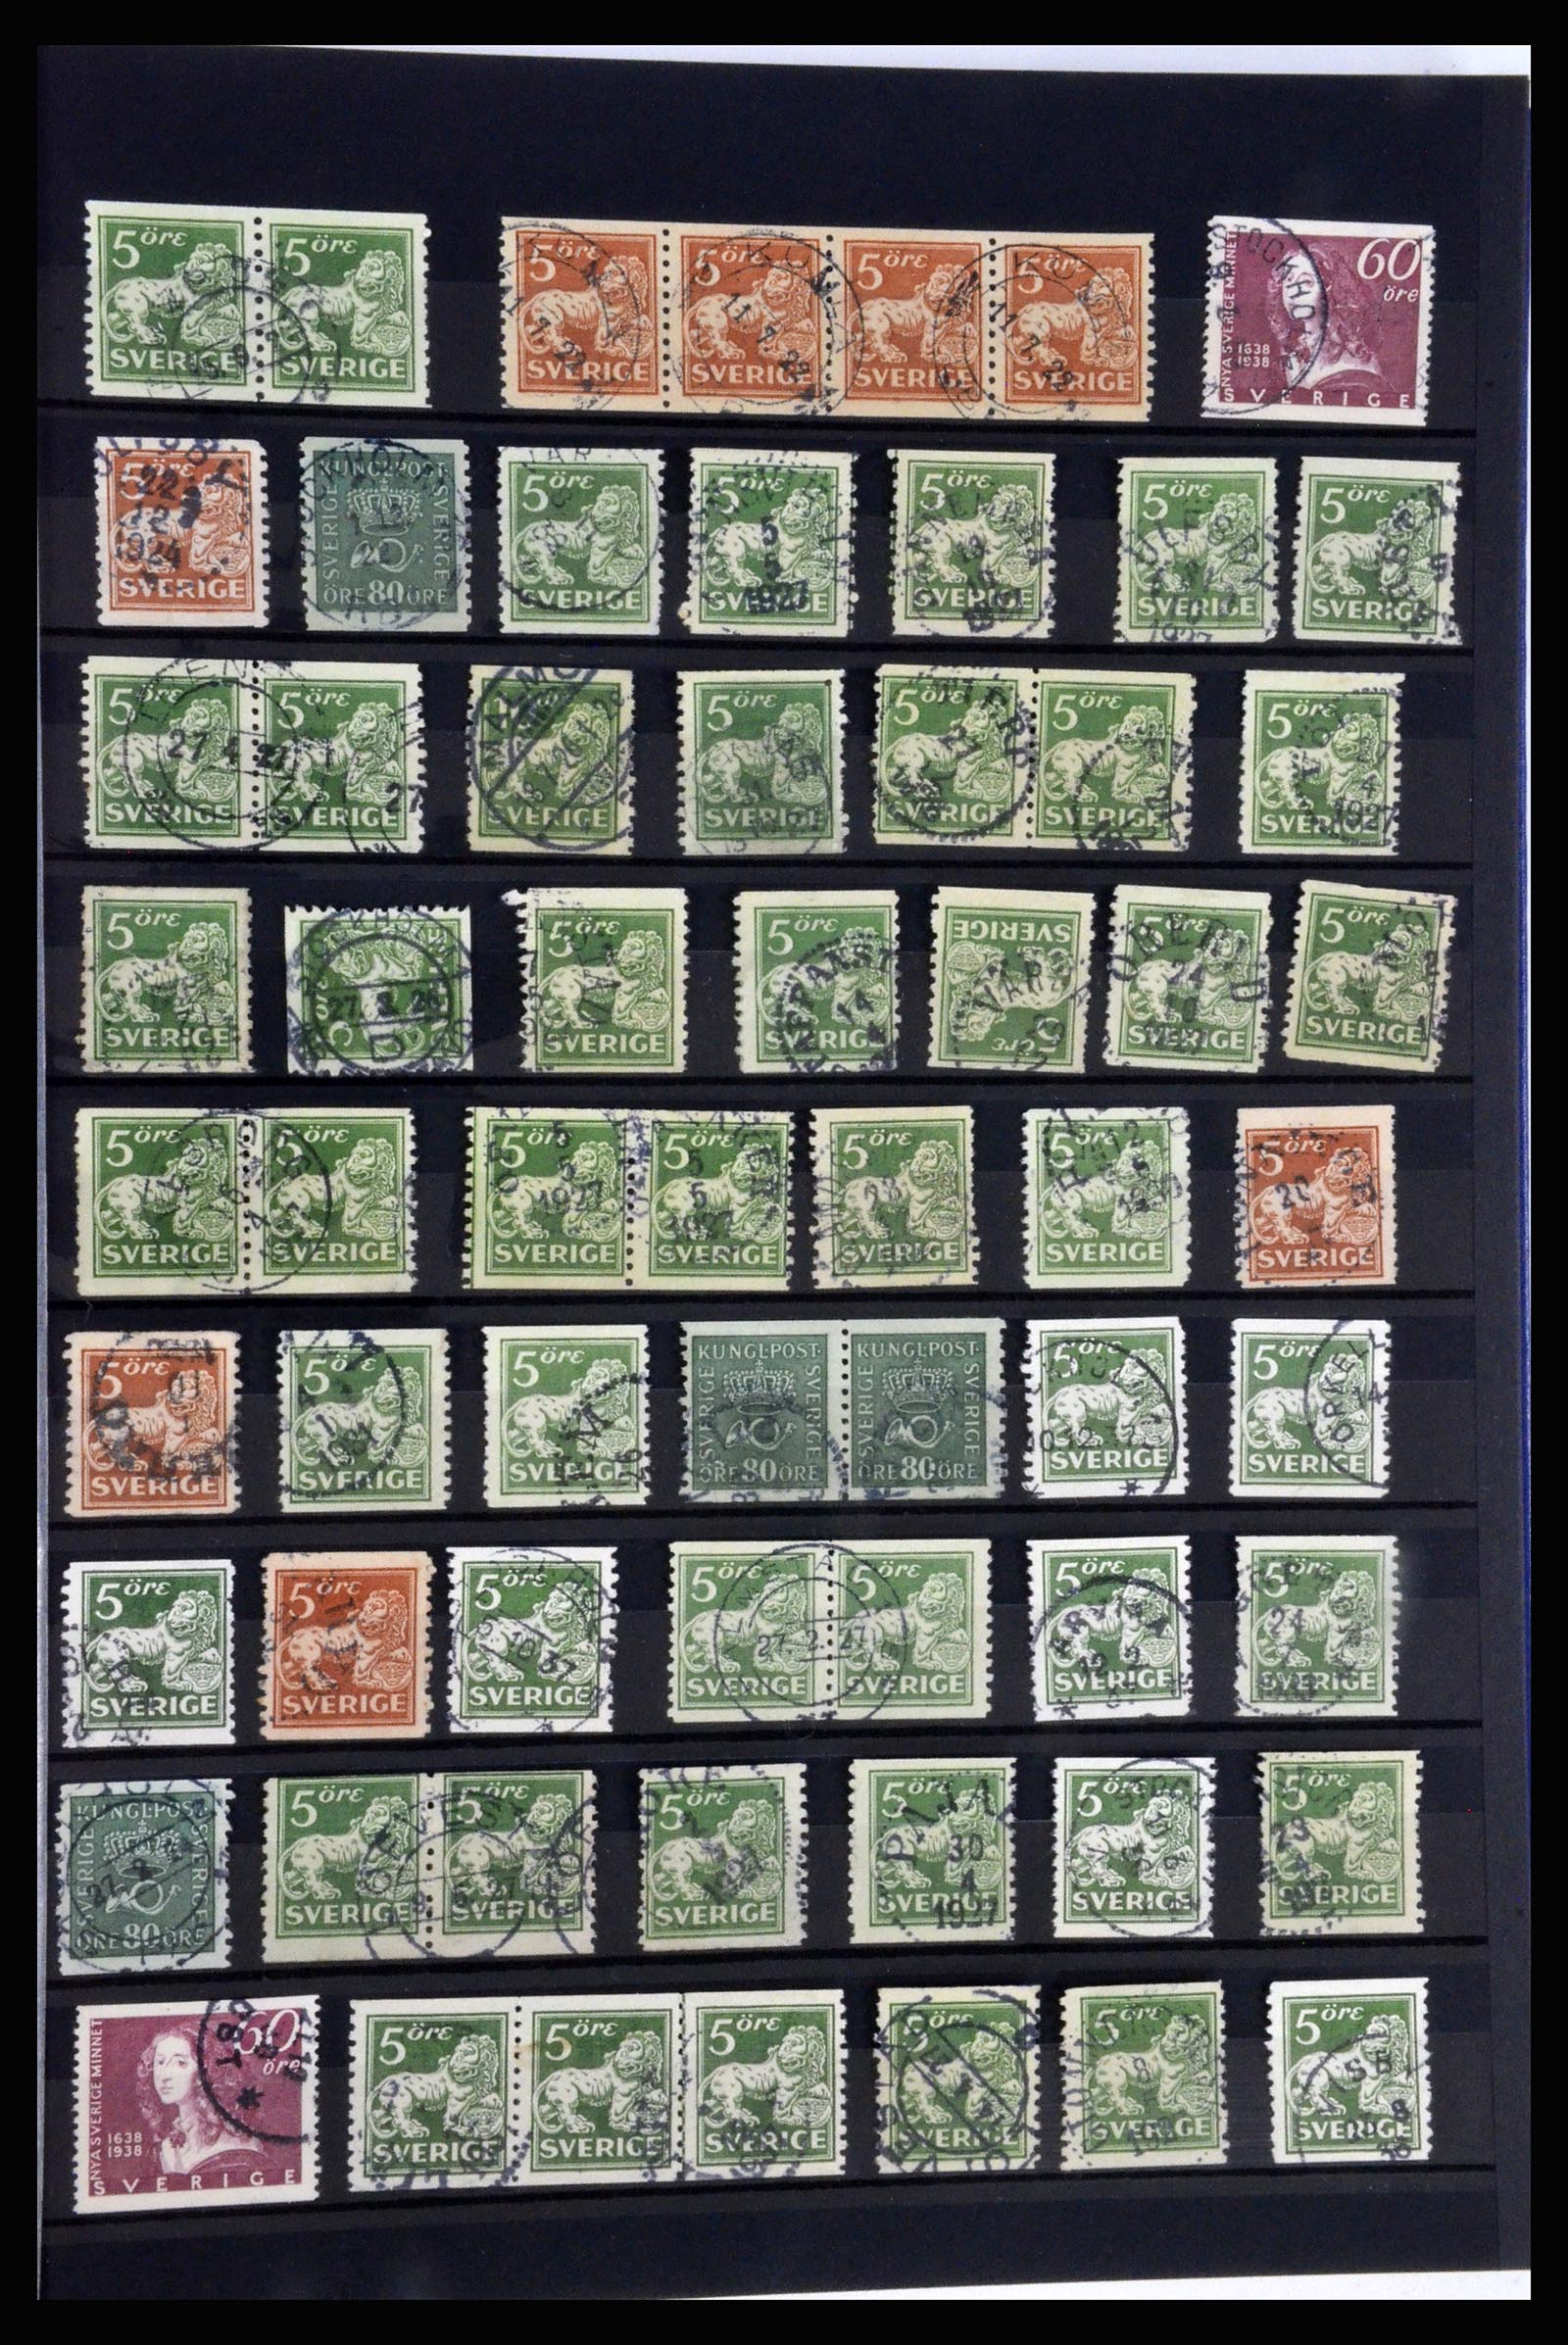 36316 015 - Stamp collection 36316 Sweden cancellations 1920-1938.